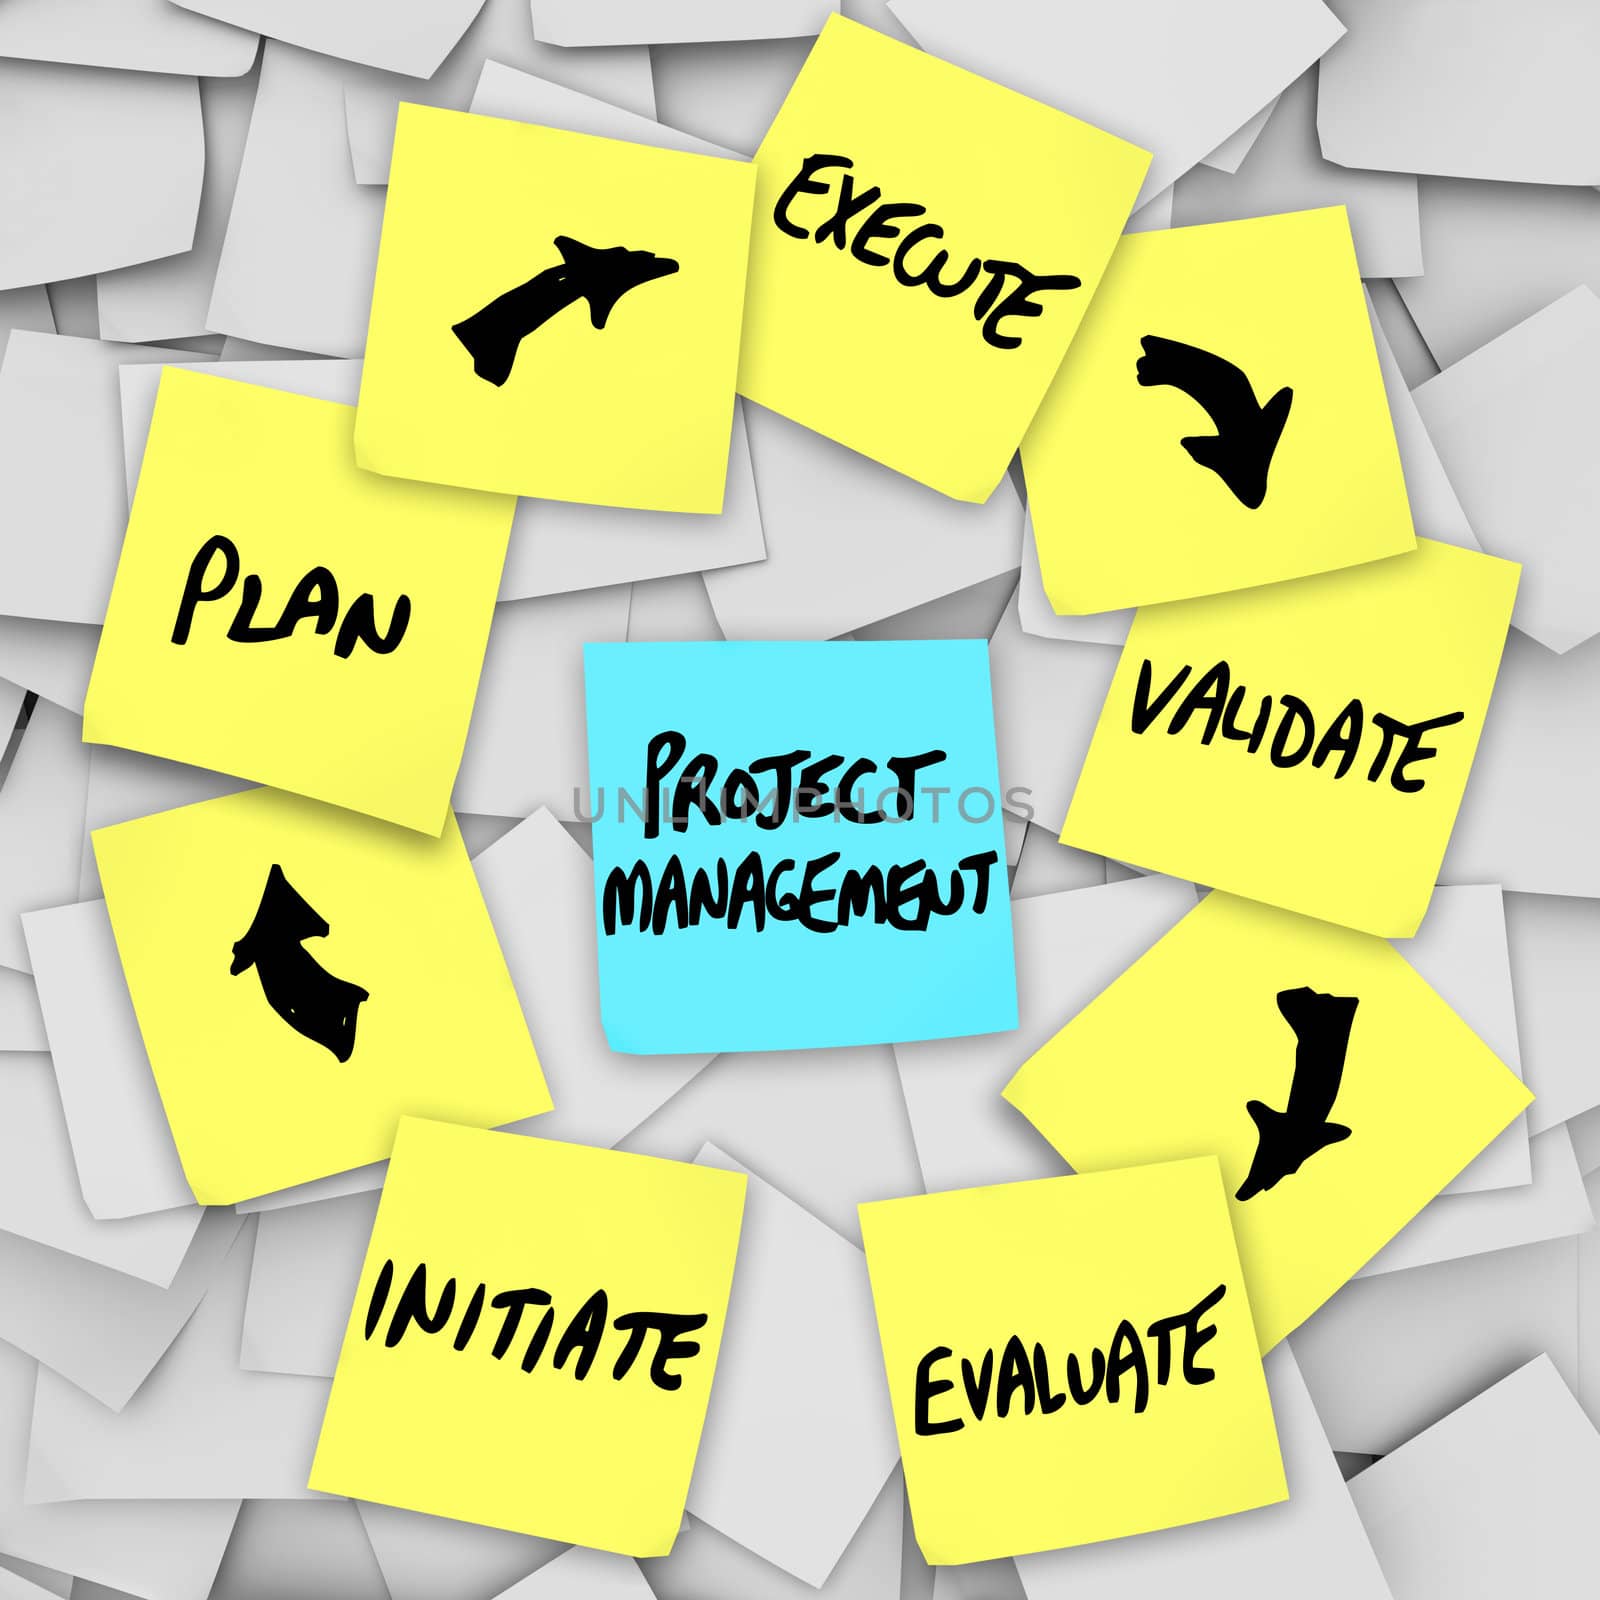 A project management workflow diagram written on yellow sticky notes with various steps and levels on each note: initiate, plan, execute, validate, evaluate